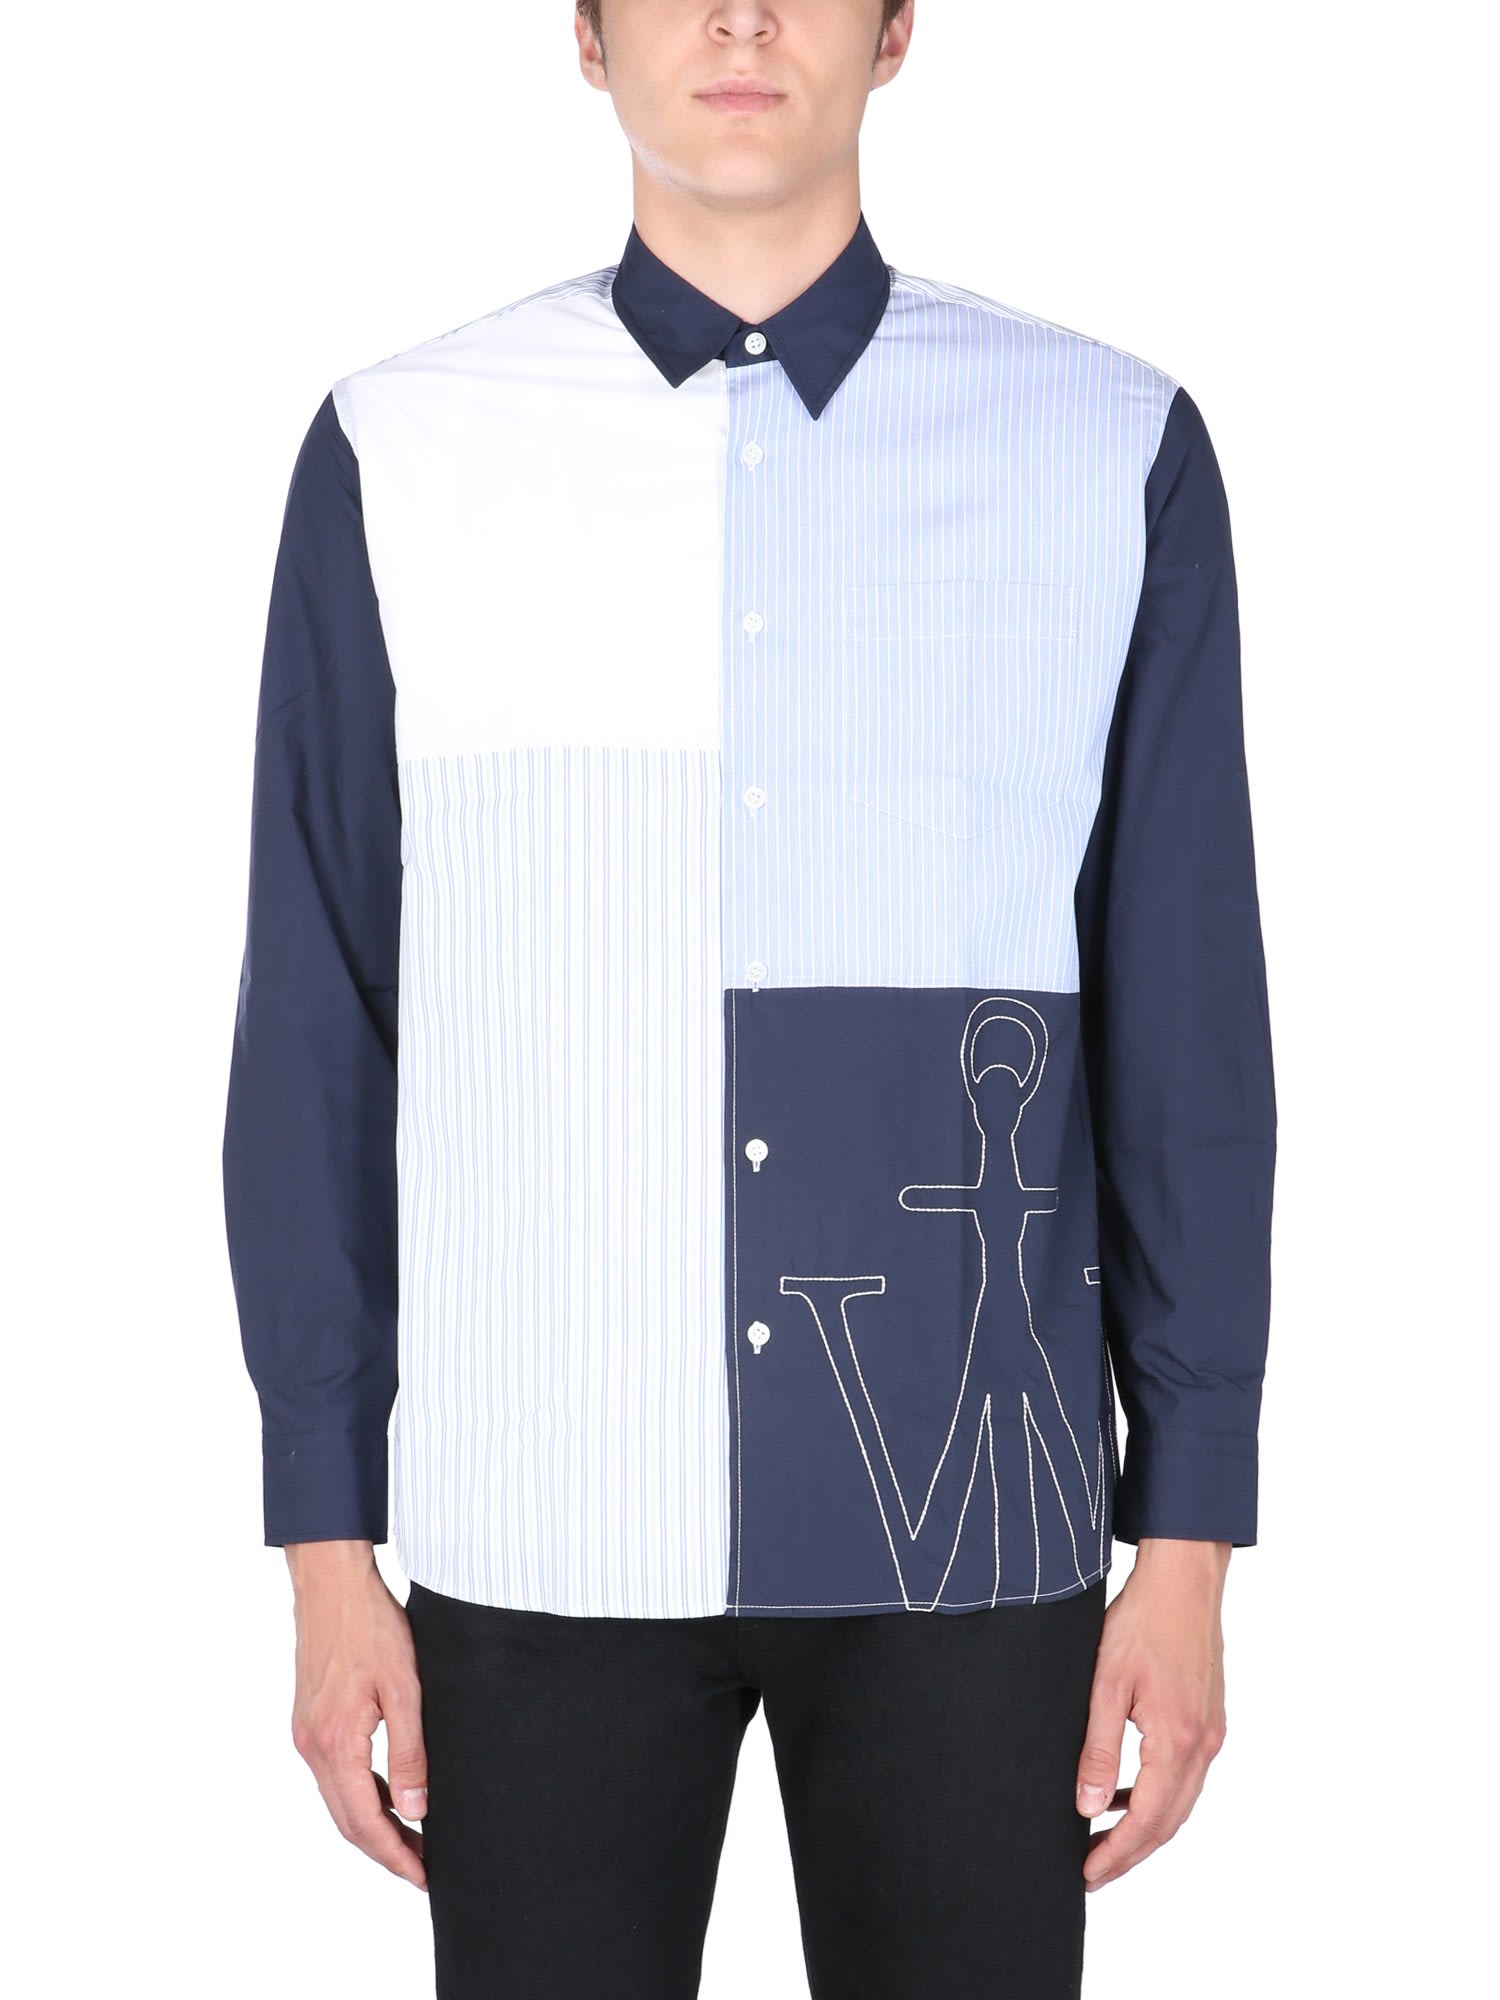 J.W. Anderson Patchwork Striped Shirt